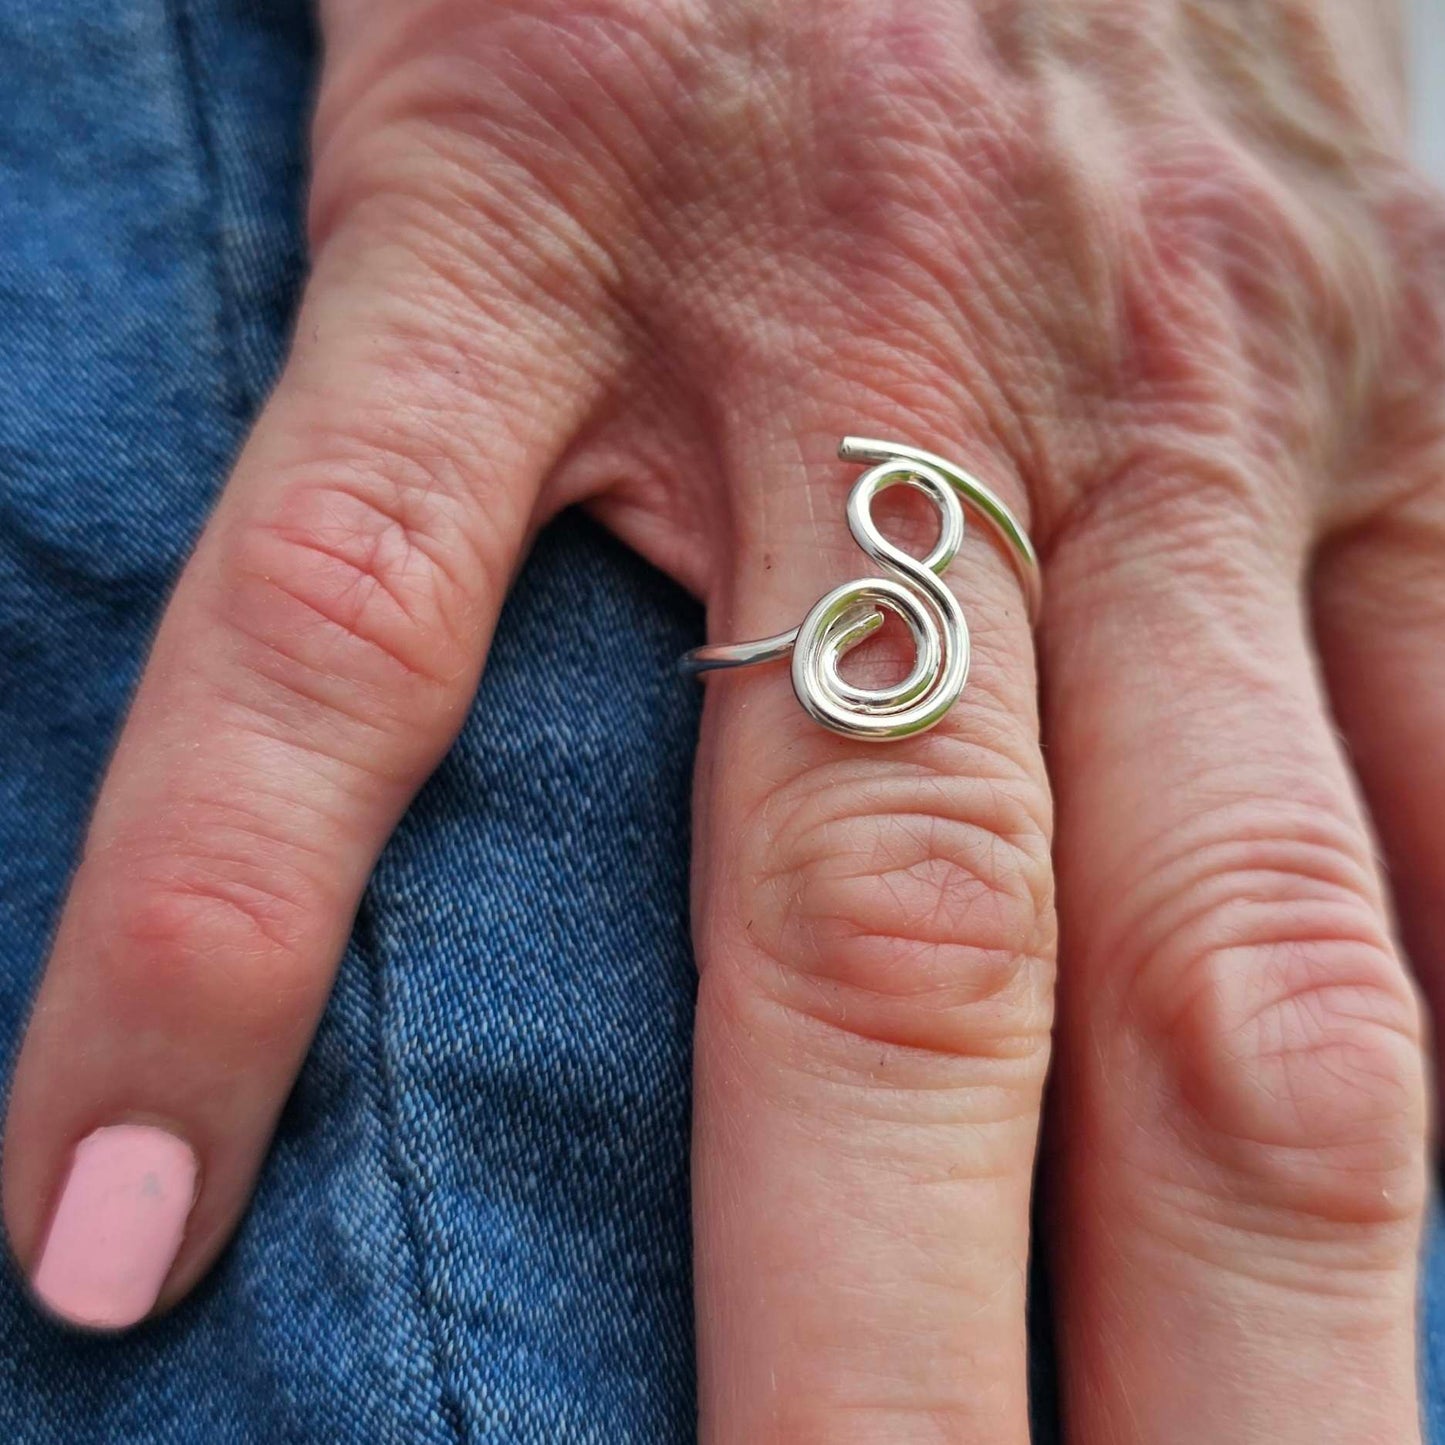 Silver adjustable gratitude ring worn on woman's index finger placed on jean pants.